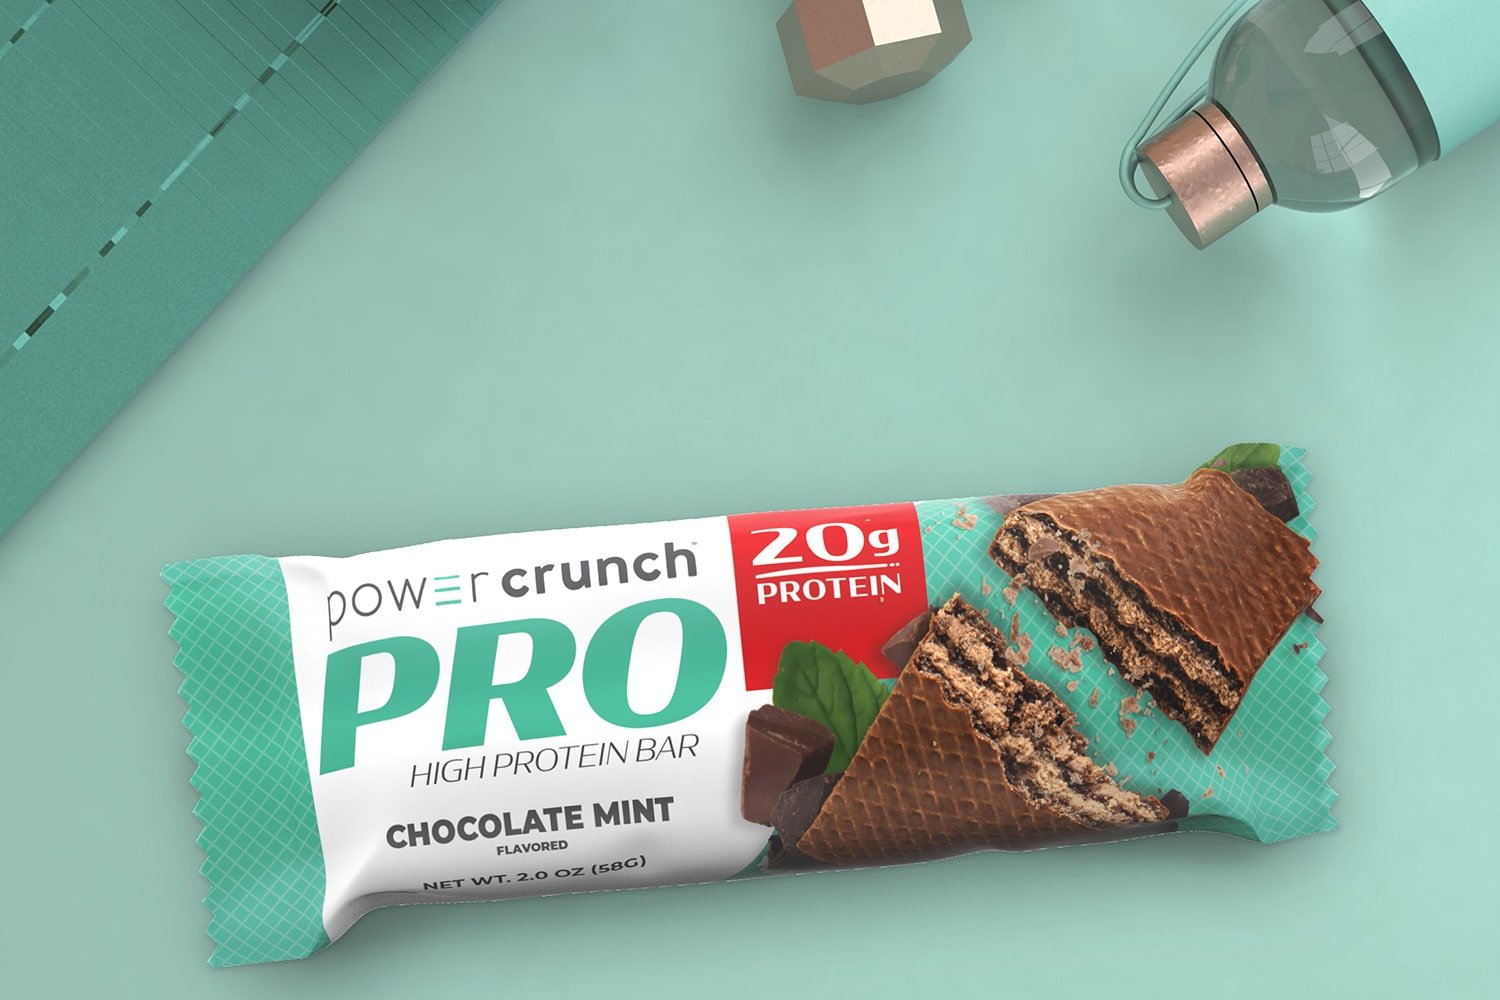 Chocolate Mint high protein bars as a workout snack